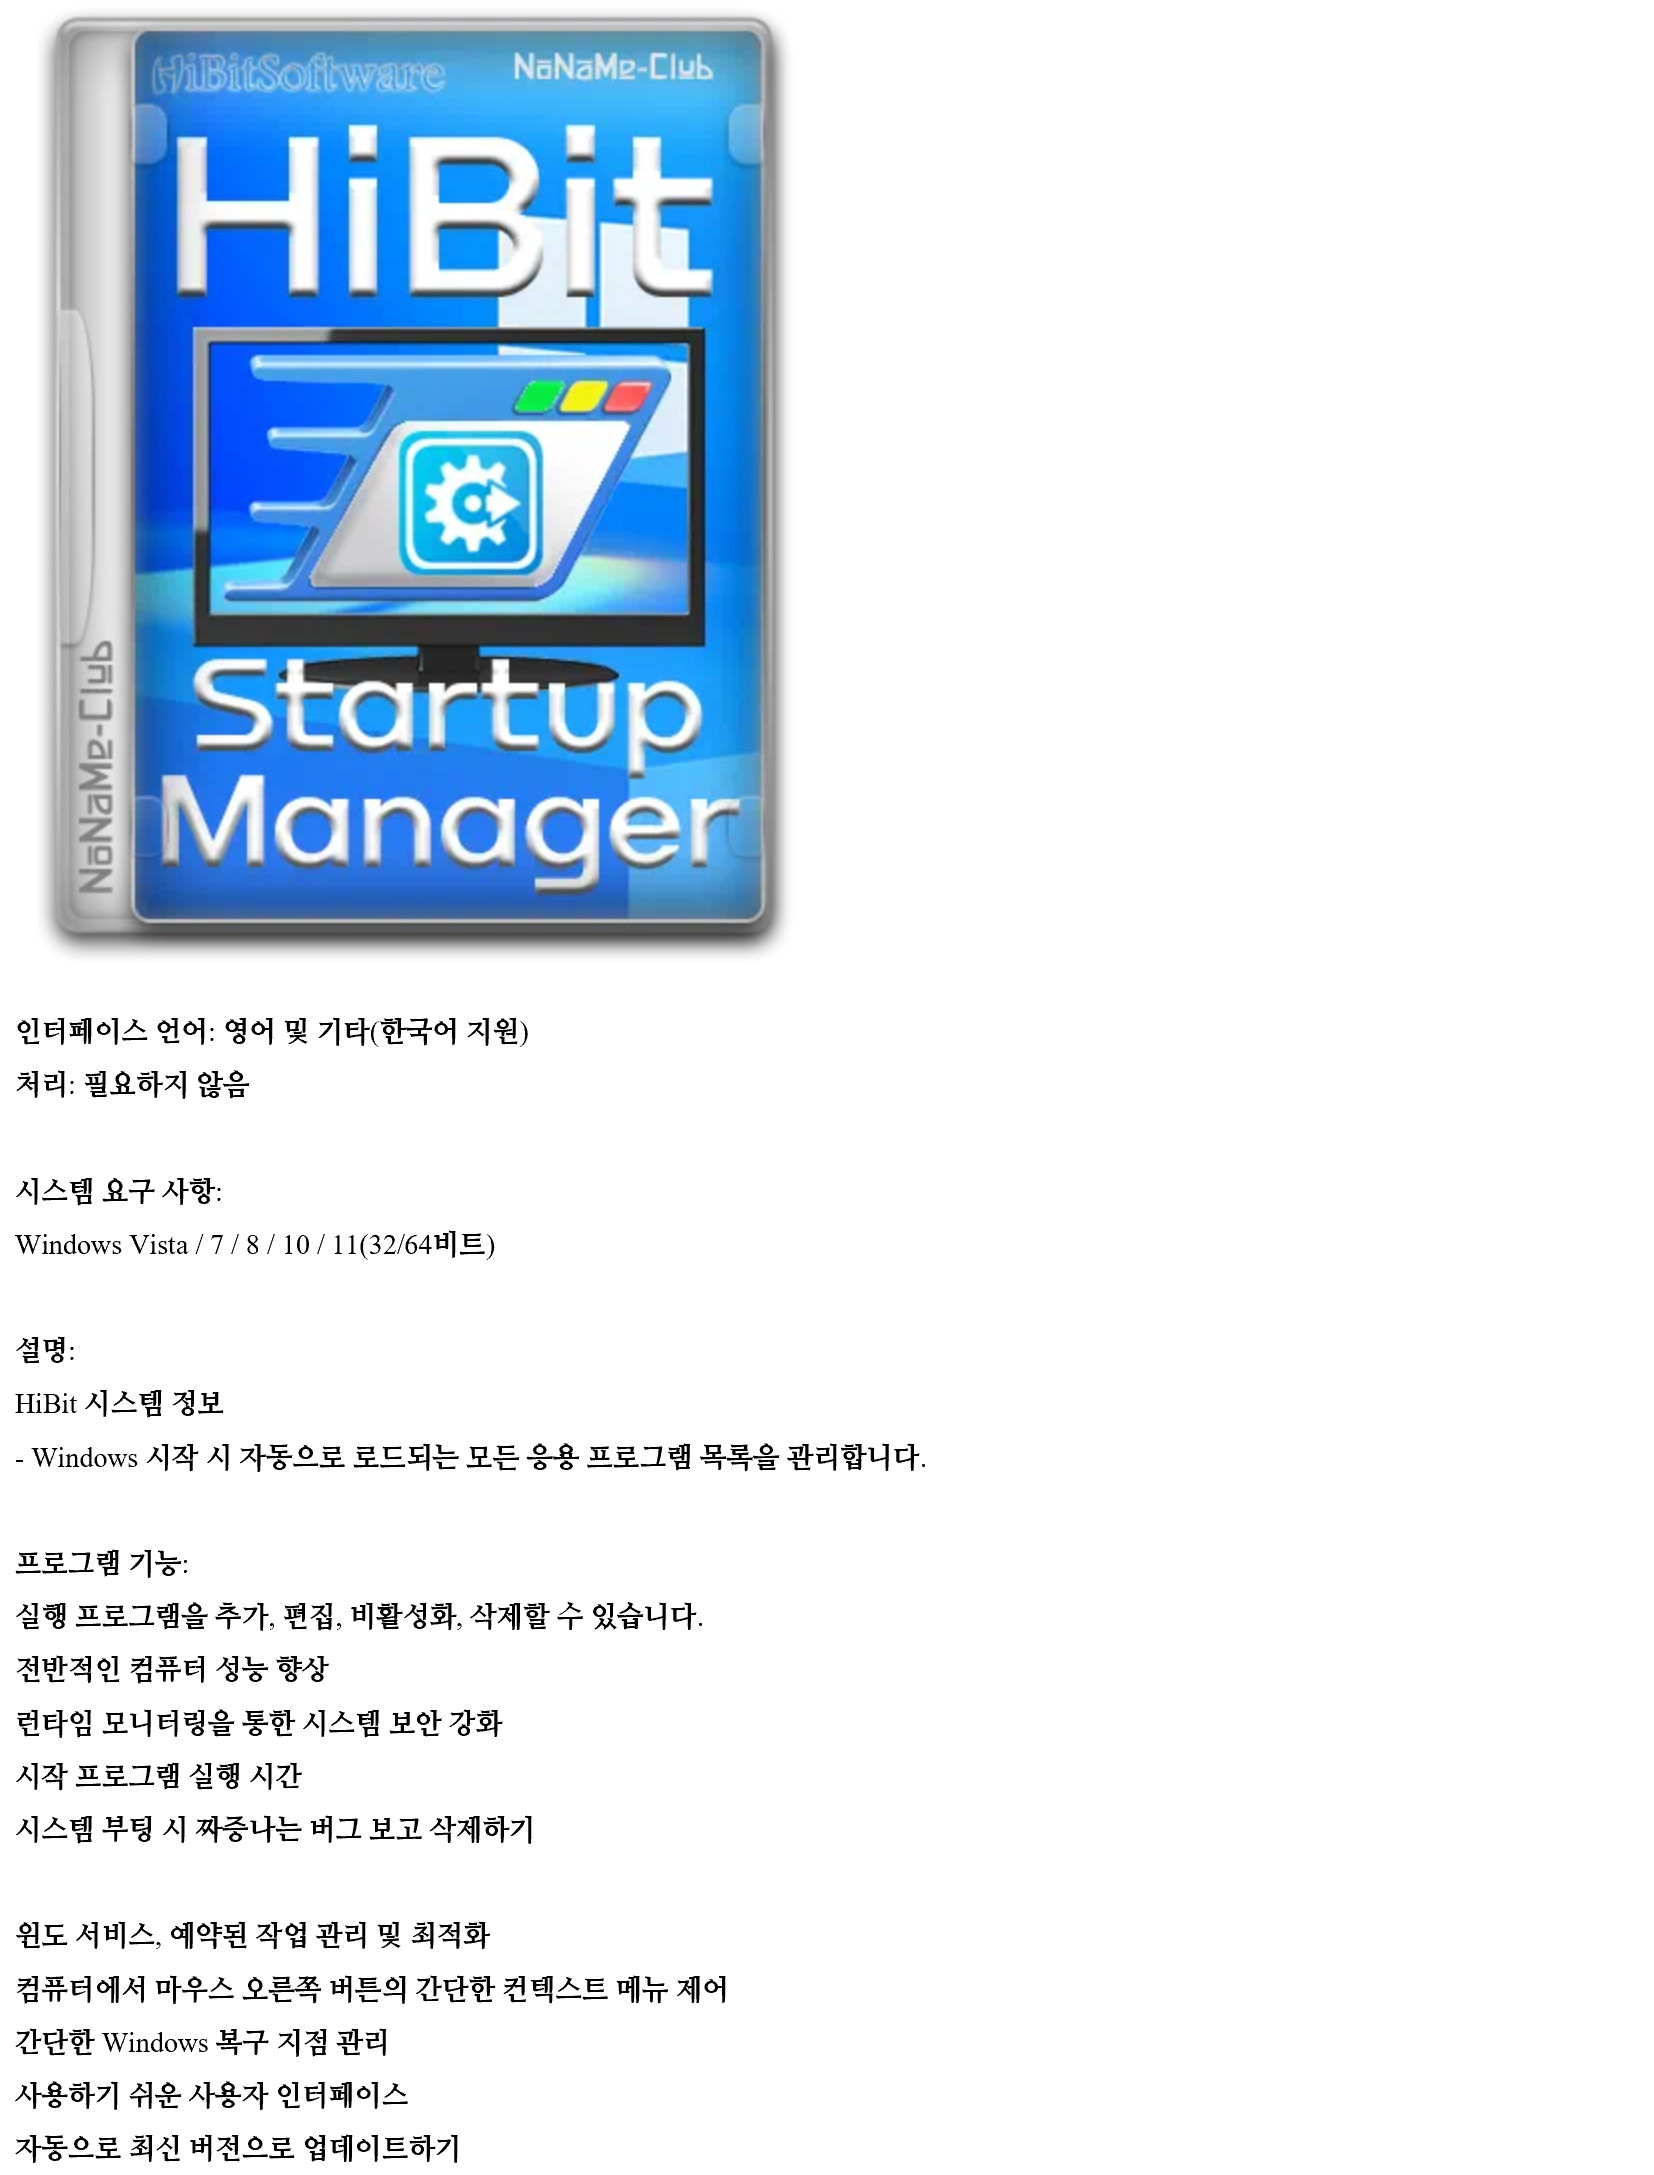 HiBit Startup Manager 2.6.20 instal the last version for iphone